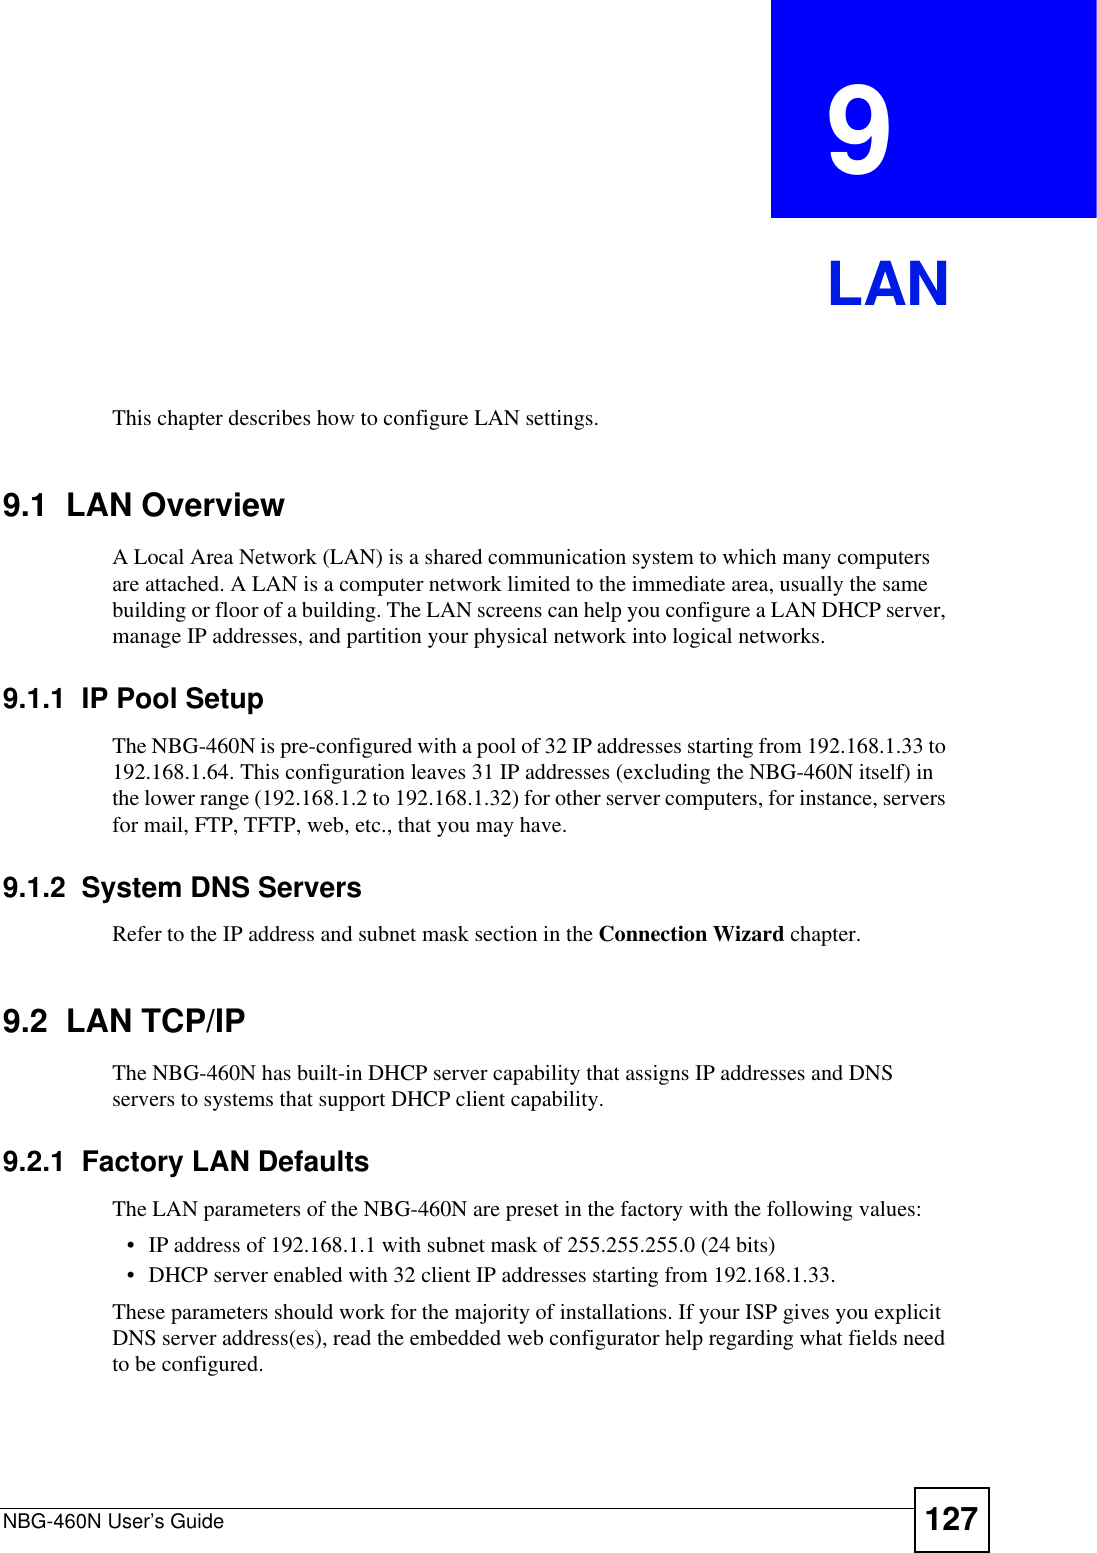 NBG-460N User’s Guide 127CHAPTER  9 LANThis chapter describes how to configure LAN settings.9.1  LAN OverviewA Local Area Network (LAN) is a shared communication system to which many computers are attached. A LAN is a computer network limited to the immediate area, usually the same building or floor of a building. The LAN screens can help you configure a LAN DHCP server, manage IP addresses, and partition your physical network into logical networks.9.1.1  IP Pool SetupThe NBG-460N is pre-configured with a pool of 32 IP addresses starting from 192.168.1.33 to 192.168.1.64. This configuration leaves 31 IP addresses (excluding the NBG-460N itself) in the lower range (192.168.1.2 to 192.168.1.32) for other server computers, for instance, servers for mail, FTP, TFTP, web, etc., that you may have.9.1.2  System DNS ServersRefer to the IP address and subnet mask section in the Connection Wizard chapter.9.2  LAN TCP/IP The NBG-460N has built-in DHCP server capability that assigns IP addresses and DNS servers to systems that support DHCP client capability.9.2.1  Factory LAN DefaultsThe LAN parameters of the NBG-460N are preset in the factory with the following values:• IP address of 192.168.1.1 with subnet mask of 255.255.255.0 (24 bits)• DHCP server enabled with 32 client IP addresses starting from 192.168.1.33. These parameters should work for the majority of installations. If your ISP gives you explicit DNS server address(es), read the embedded web configurator help regarding what fields need to be configured.